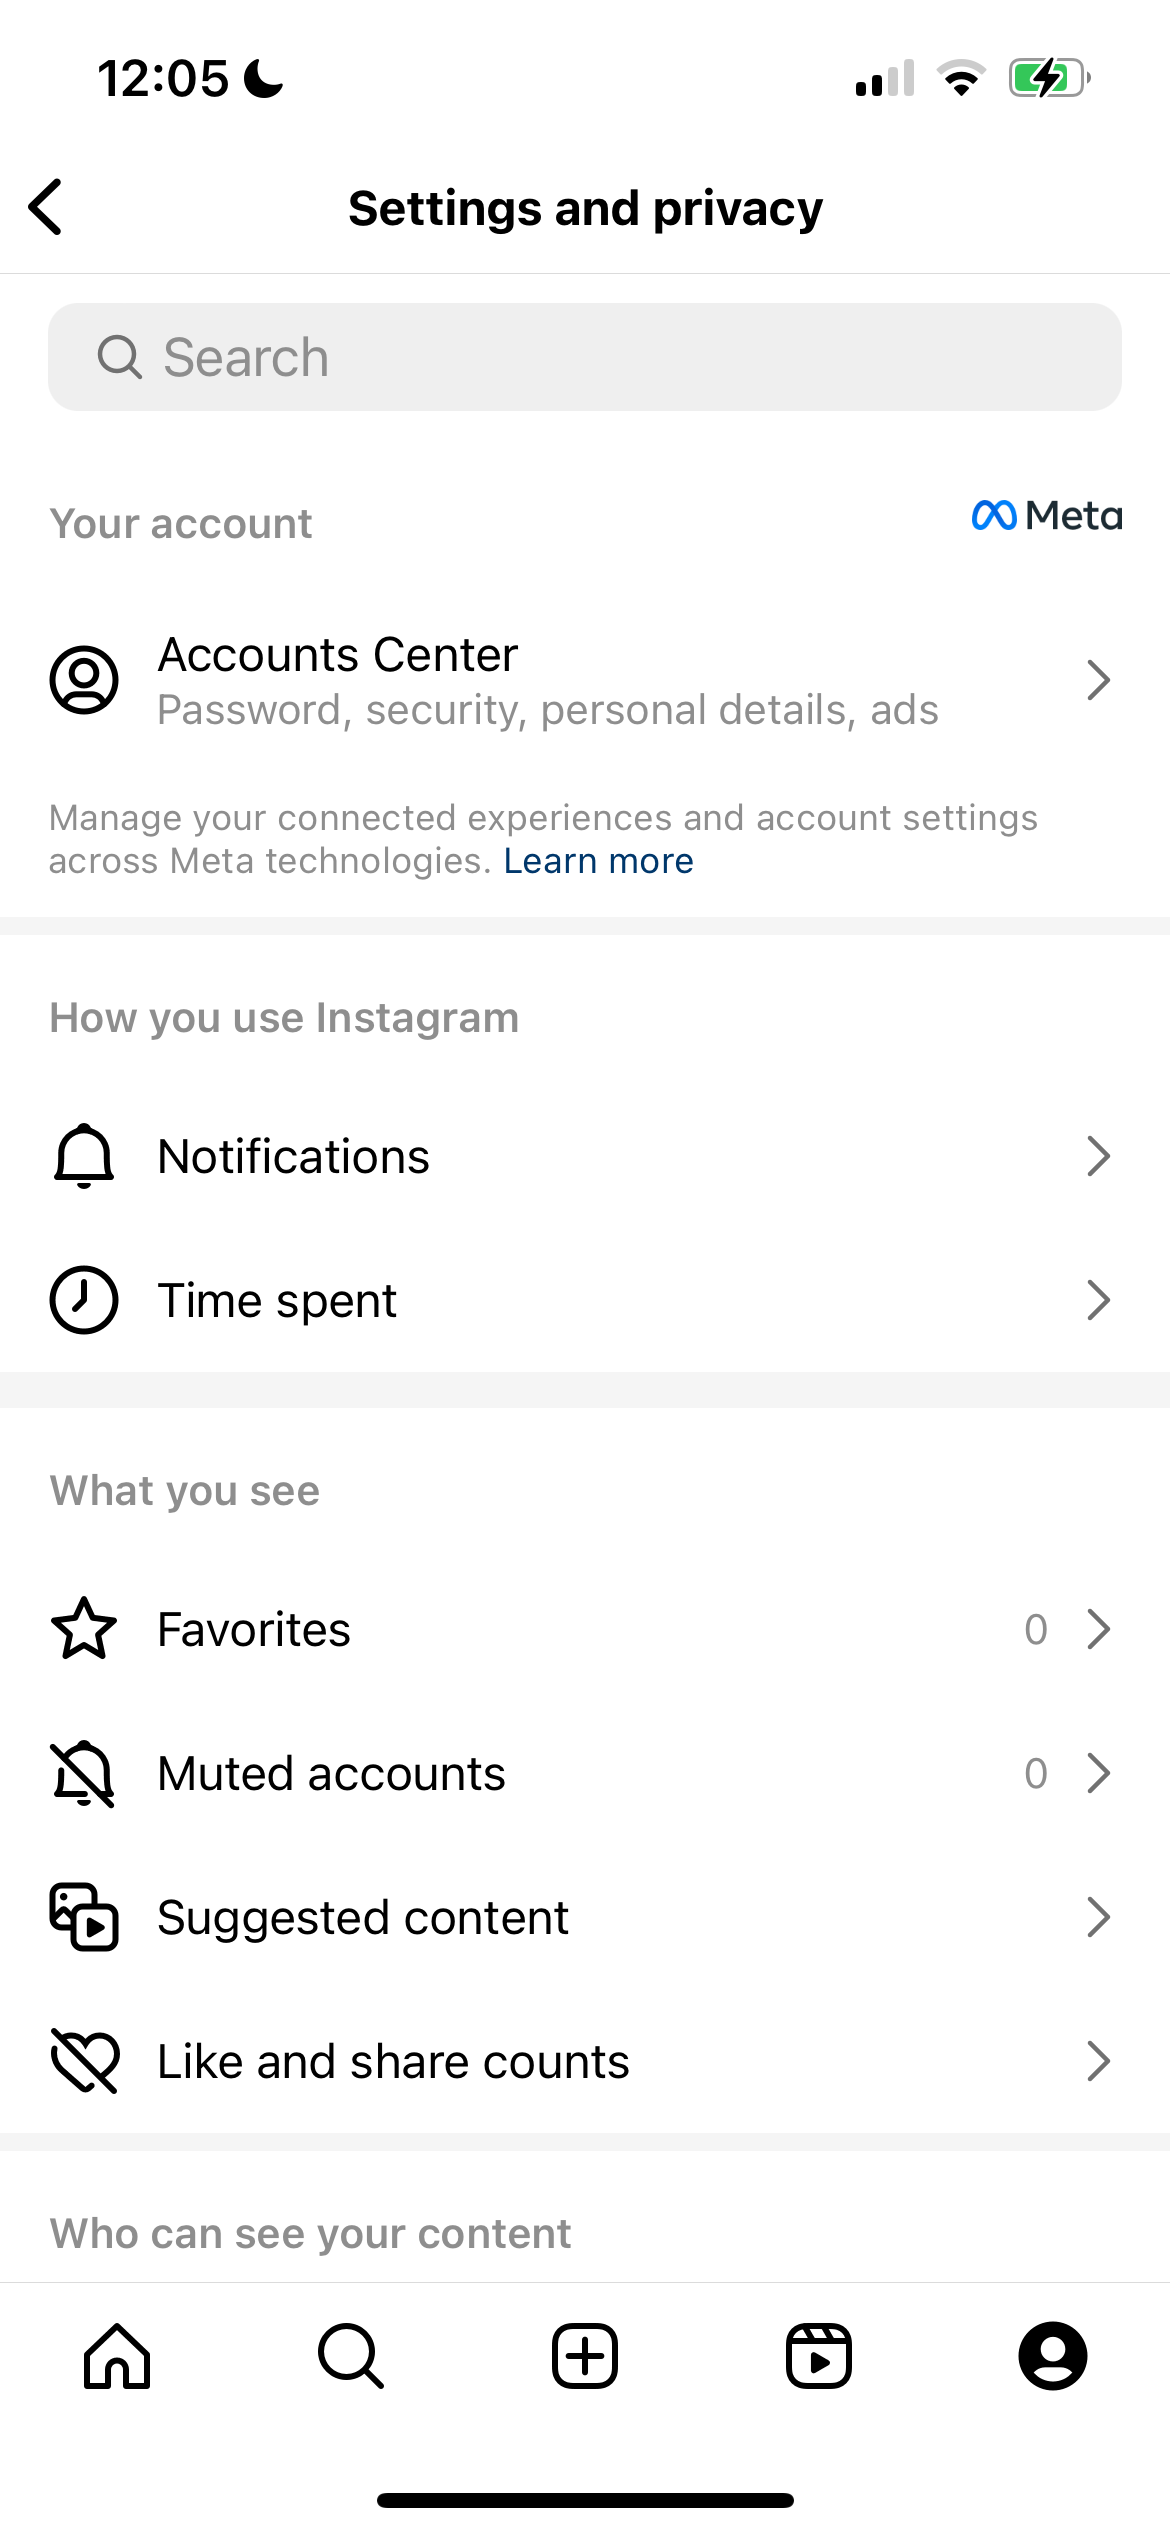 The list of settings in Settings and Privacy on Instagram